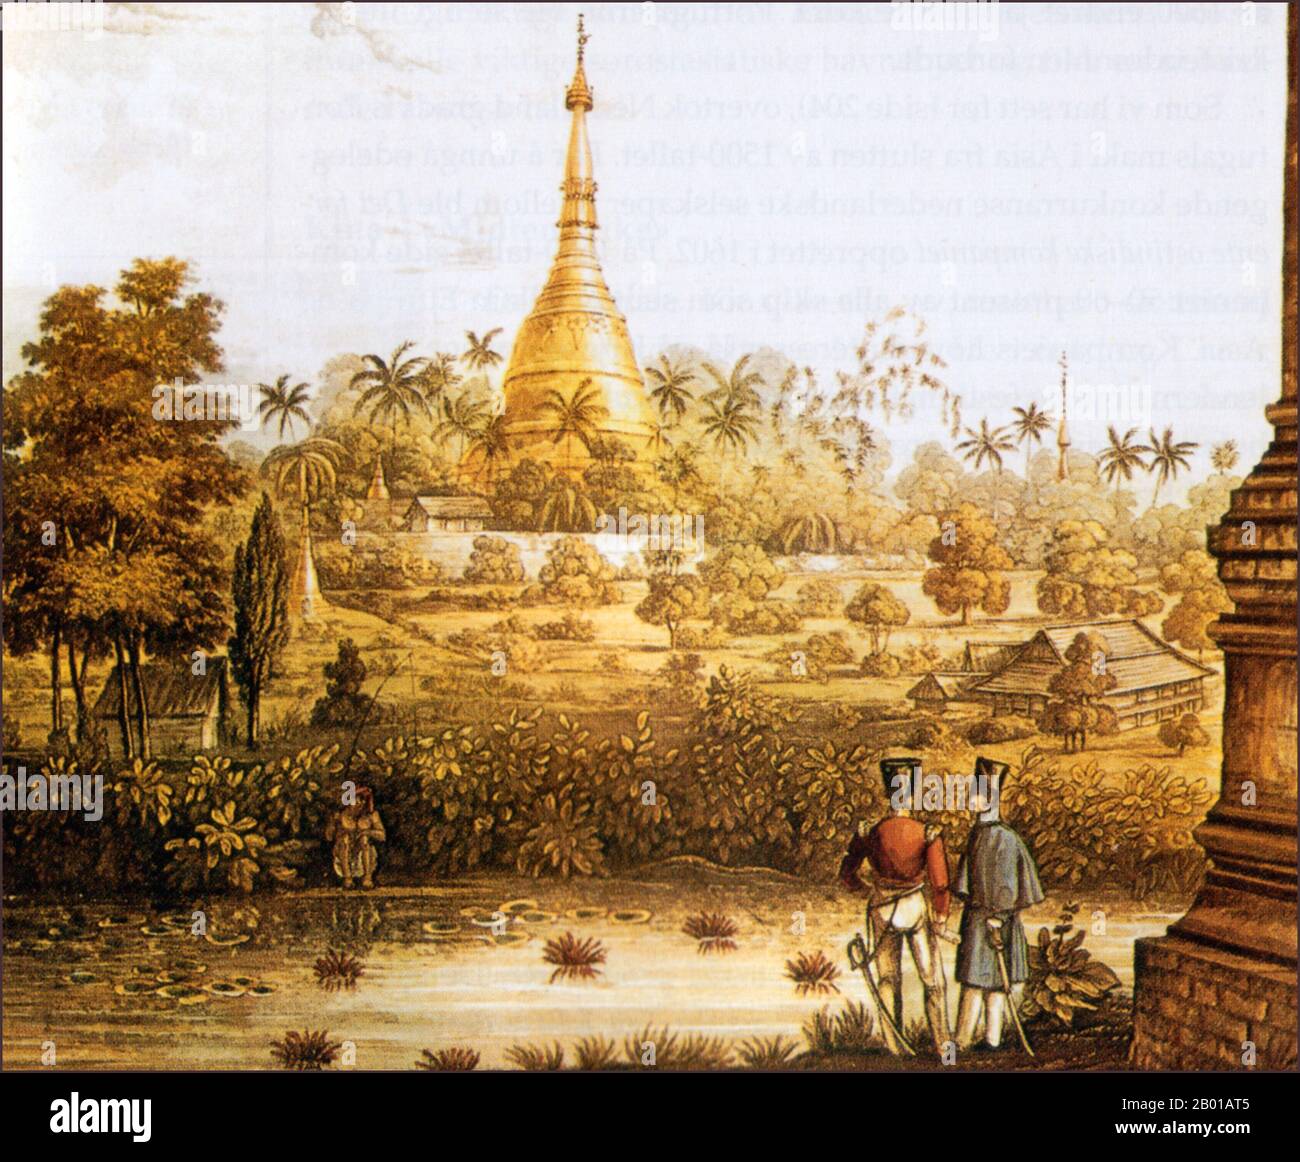 Burma/Myanmar: 'View of the Great Dagon Pagoda (Shwedagon Pagoda) at Rangoon and scenery adjacent to the westward of the great road'. Engraving by George Hunt (1797-1872), 1825.  The Shwedagon Pagoda, officially called Shwedagon Zedi Daw and also known as the Golden Pagoda, is a 98 metre (322 ft) gilded pagoda and stupa located in Yangon (Rangoon), Burma. The pagoda lies to the west of Kandawgyi Lake, on Singuttara Hill, thus dominating the skyline of the city.  It is the most sacred Buddhist pagoda for the Burmese, with relics of the past four Buddhas enshrined within. Stock Photo